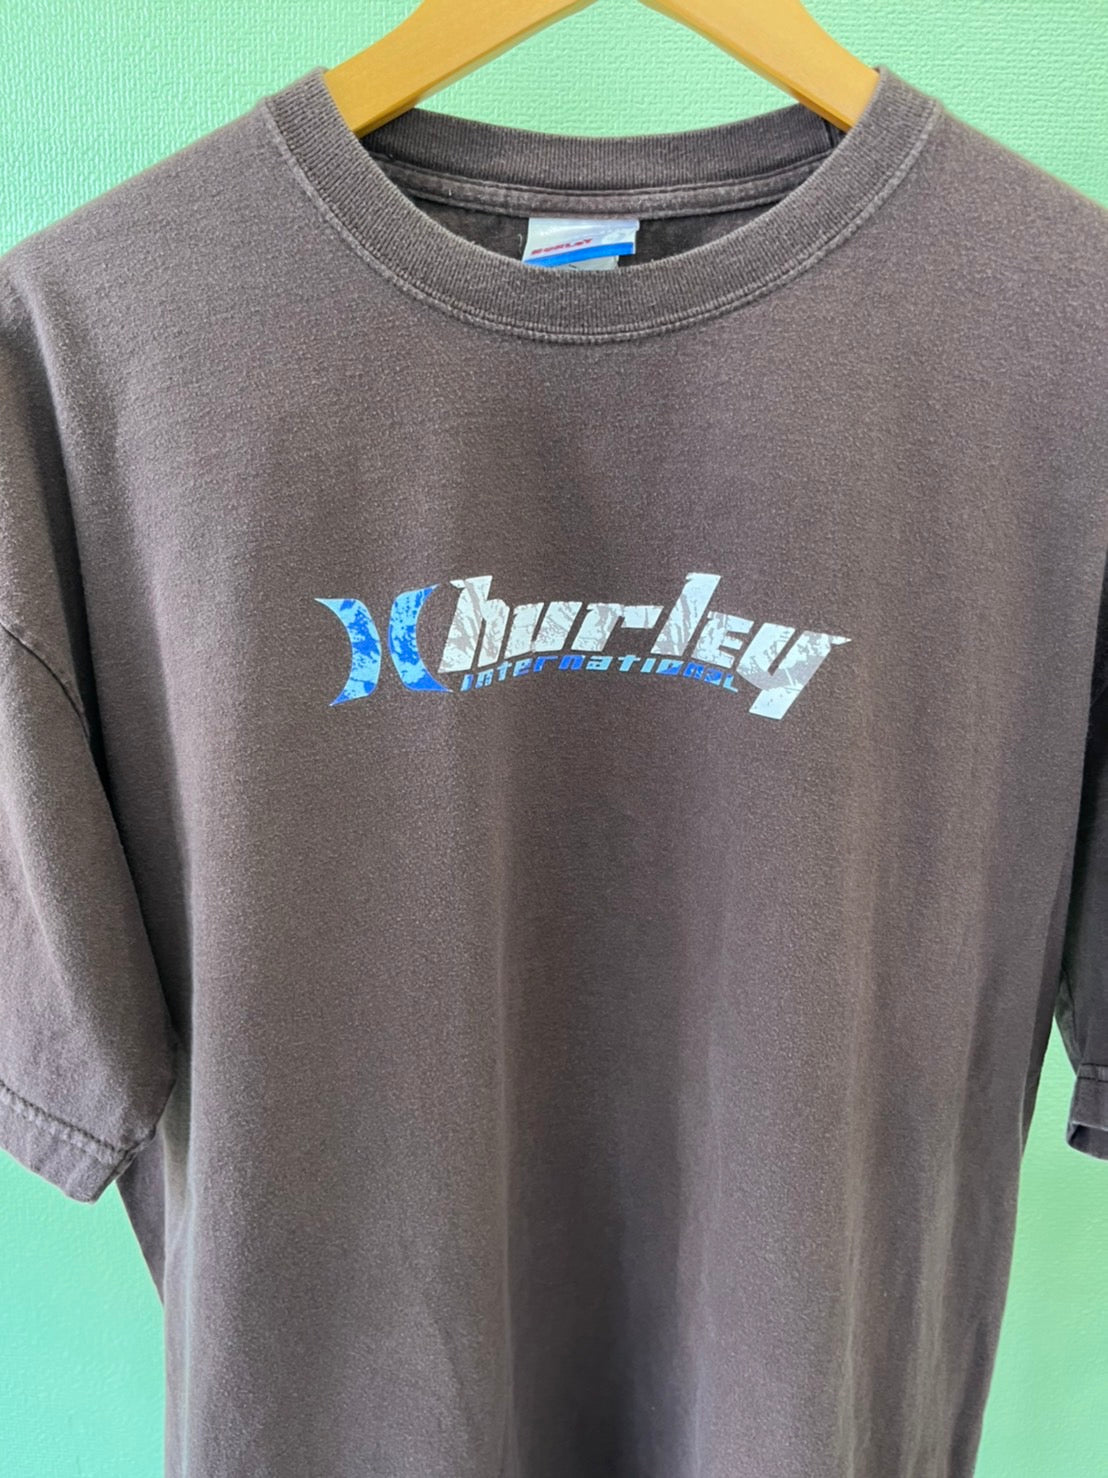 【Hurley】vintage Y2K logo brown  assembled in Mexico(USA fabric) t-shirt  (men's XL)